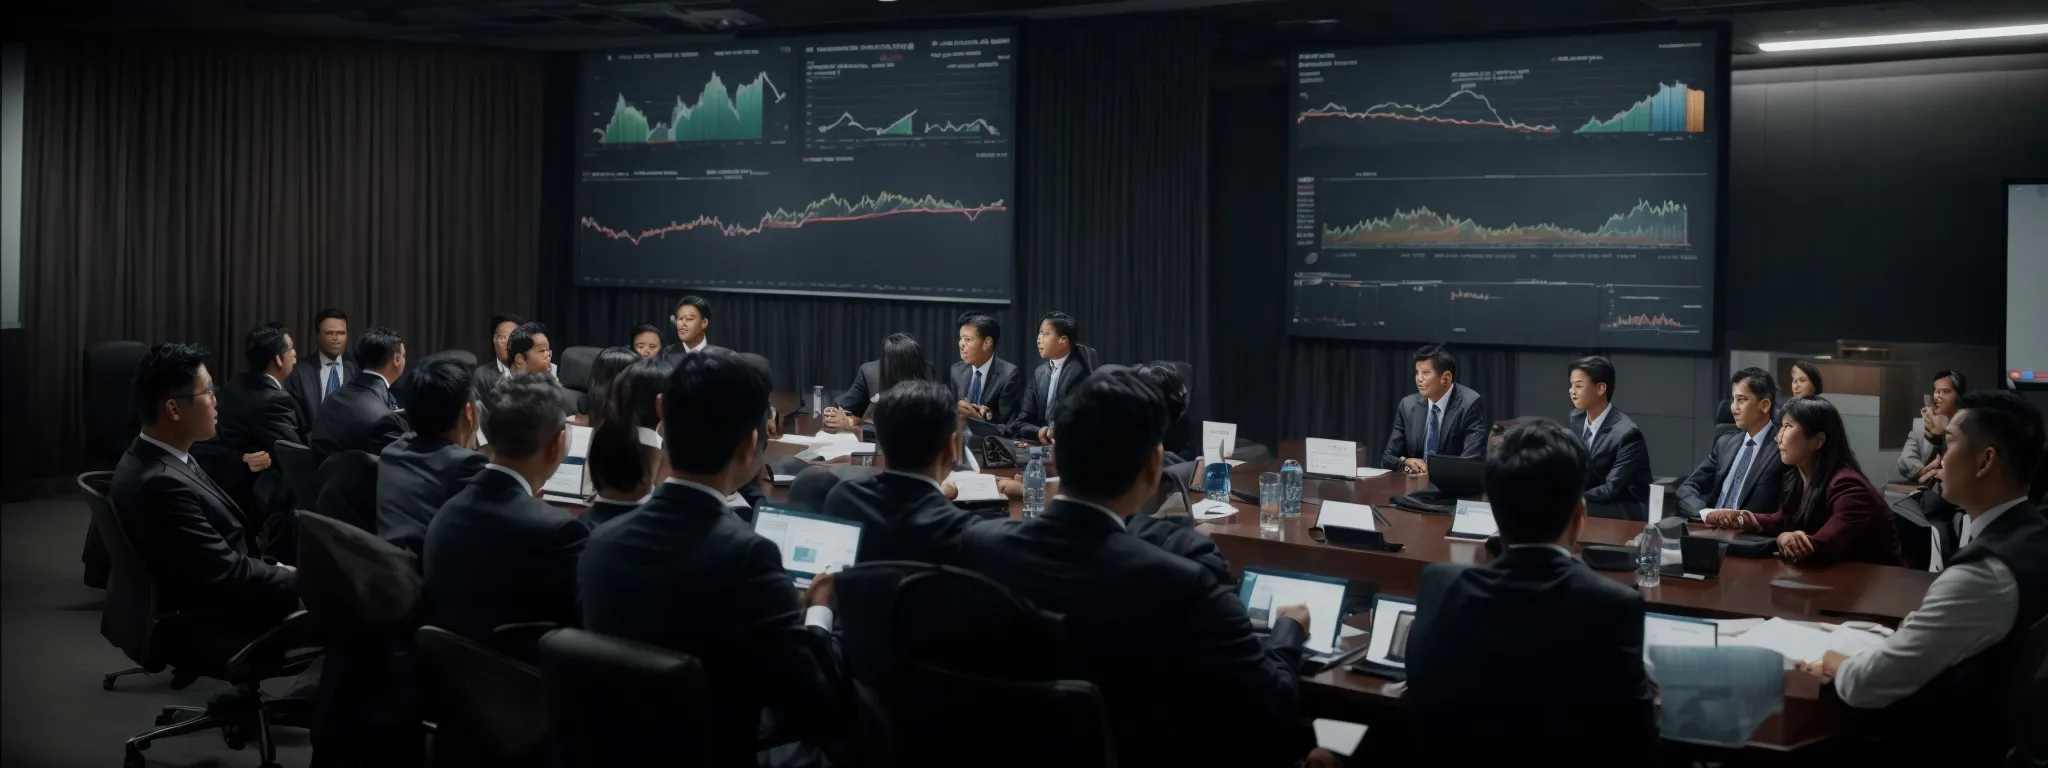 a corporate meeting with a financial presentation showcasing graphs and charts on a large screen.